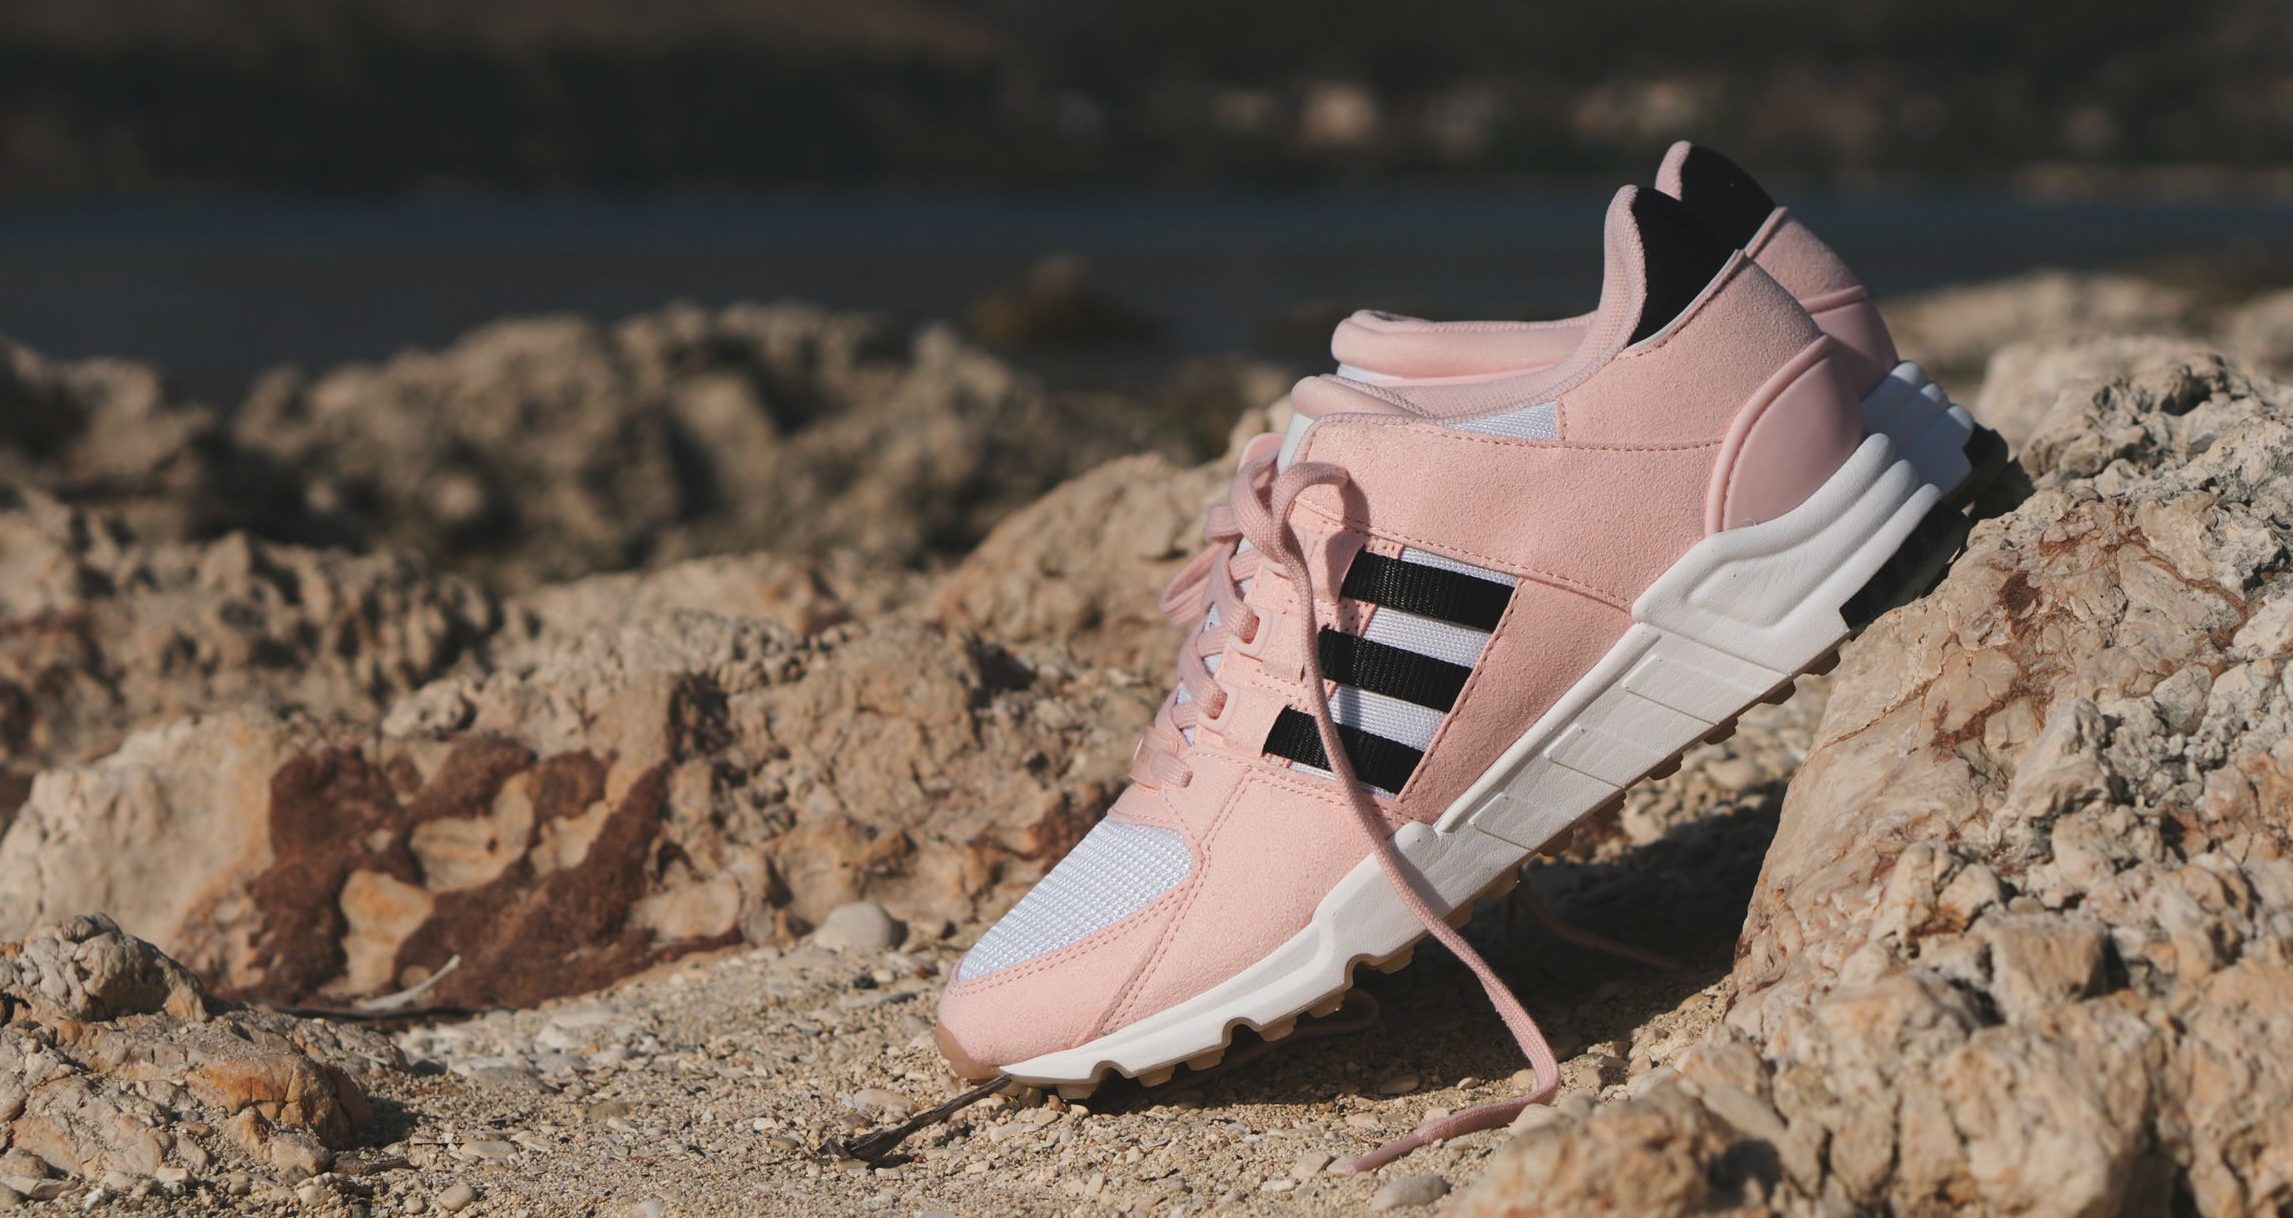 Adidas EQT “Support RF” Icey Pink